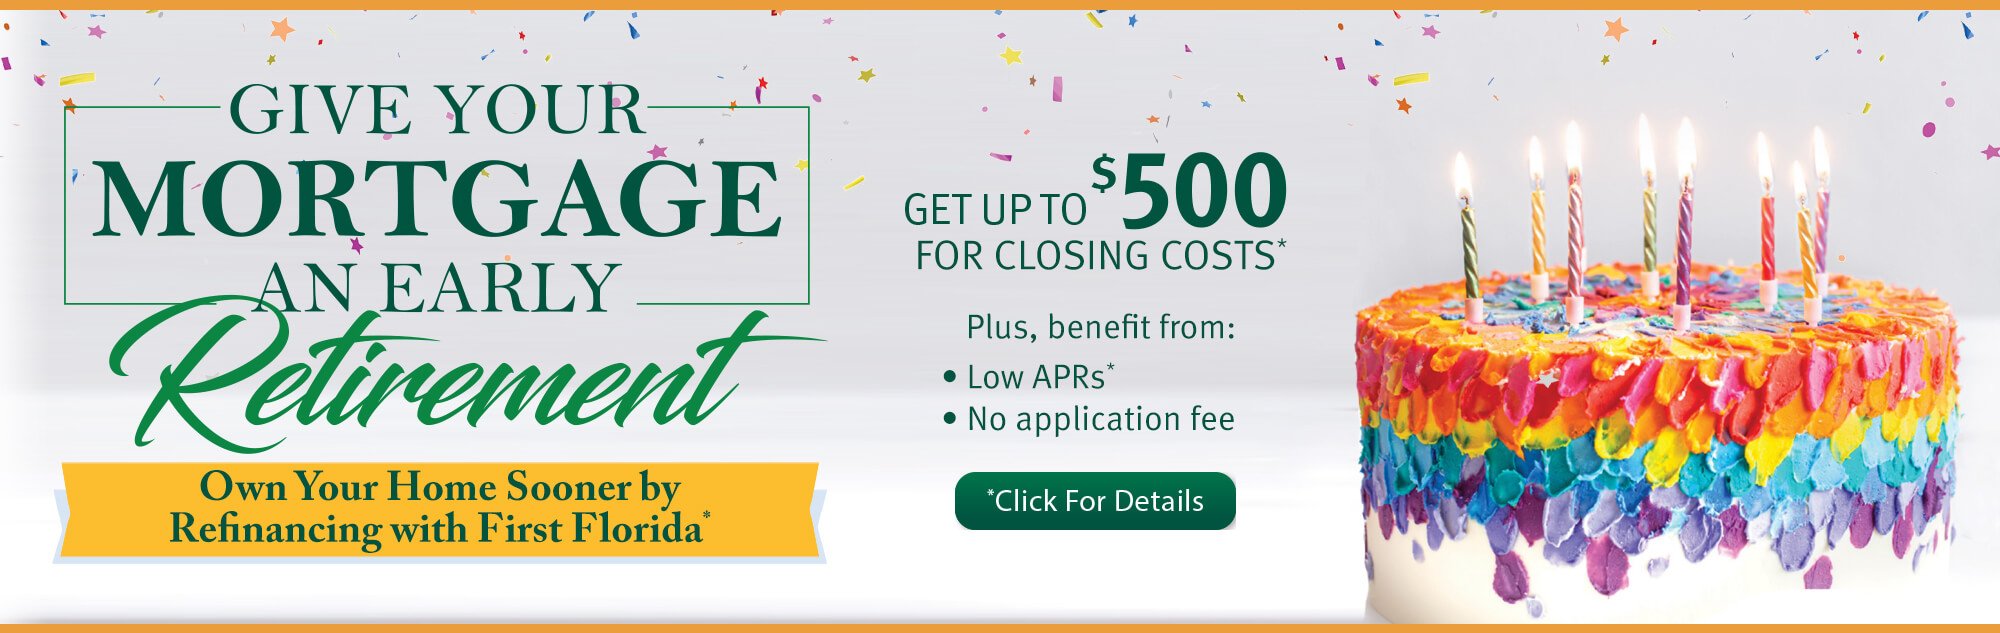 Give your mortgage an early retirement. Get up to $500 for closing costs. Click for details.